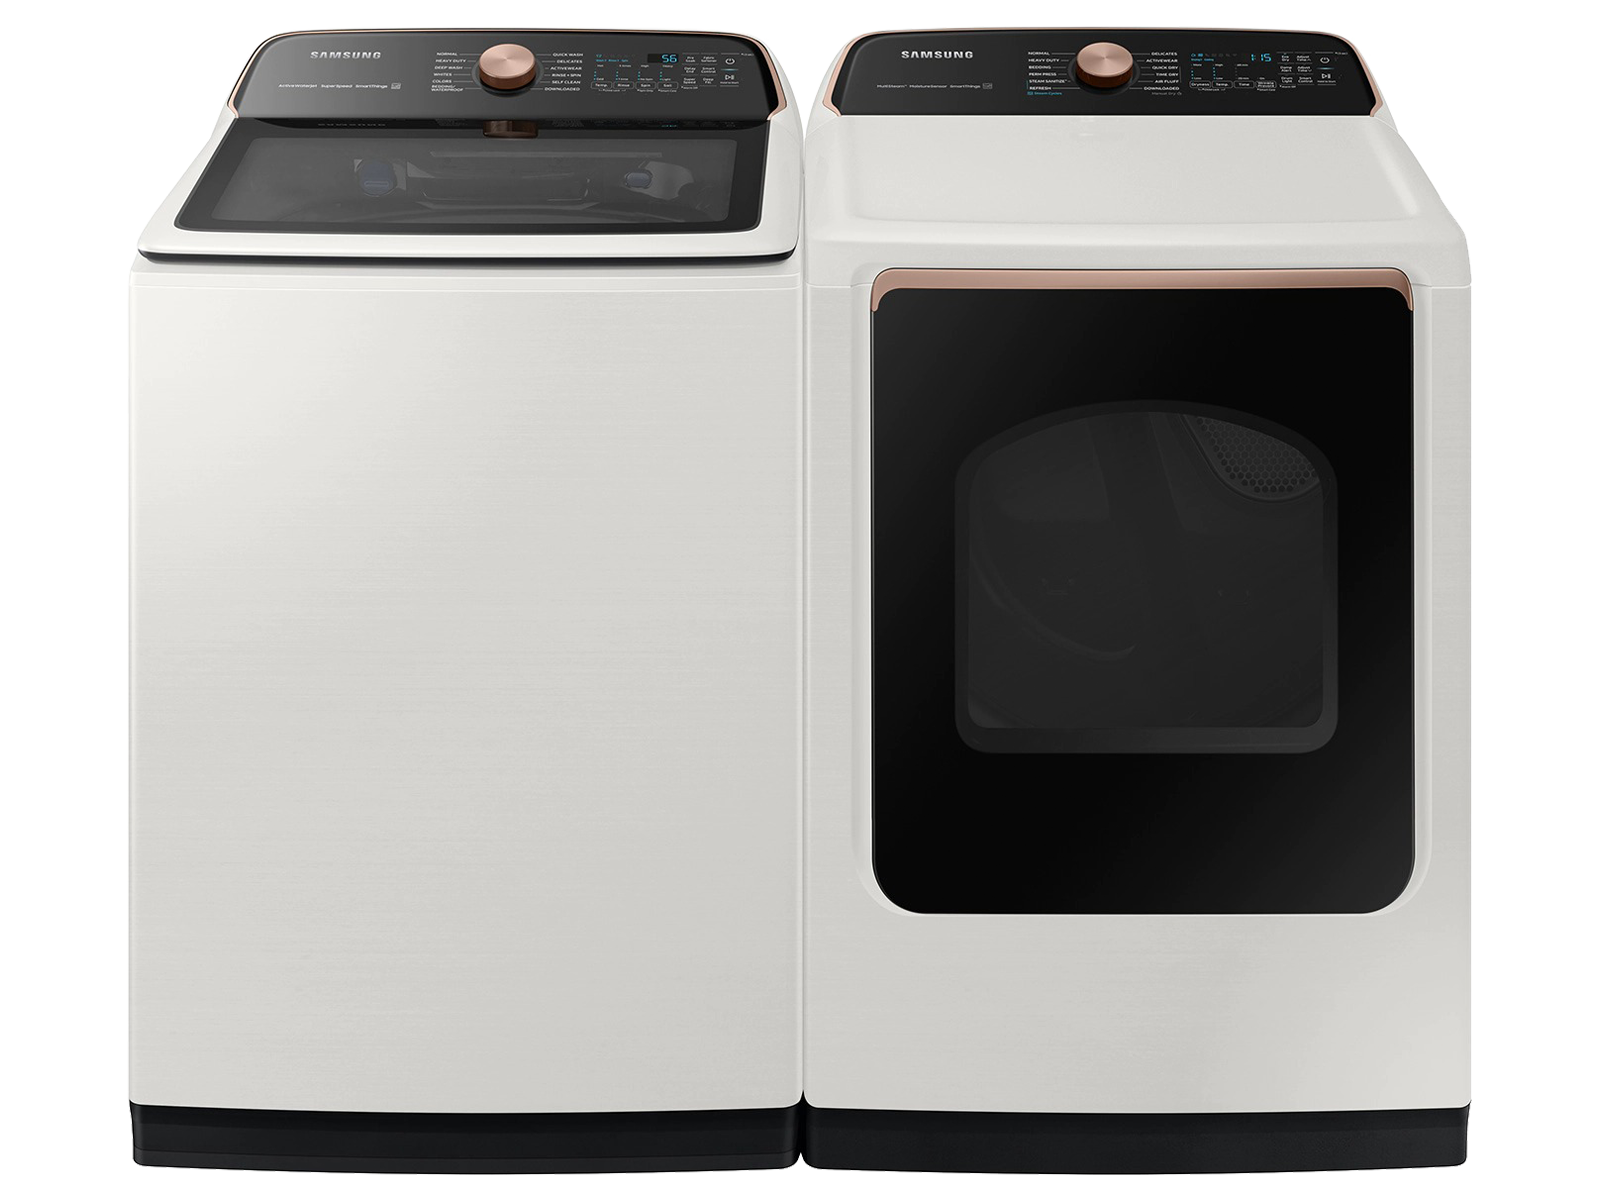 Photos - Tumble Dryer Samsung Smart Top Load Super Speed Wash Washer and Smart Steam Sanitize+ G 